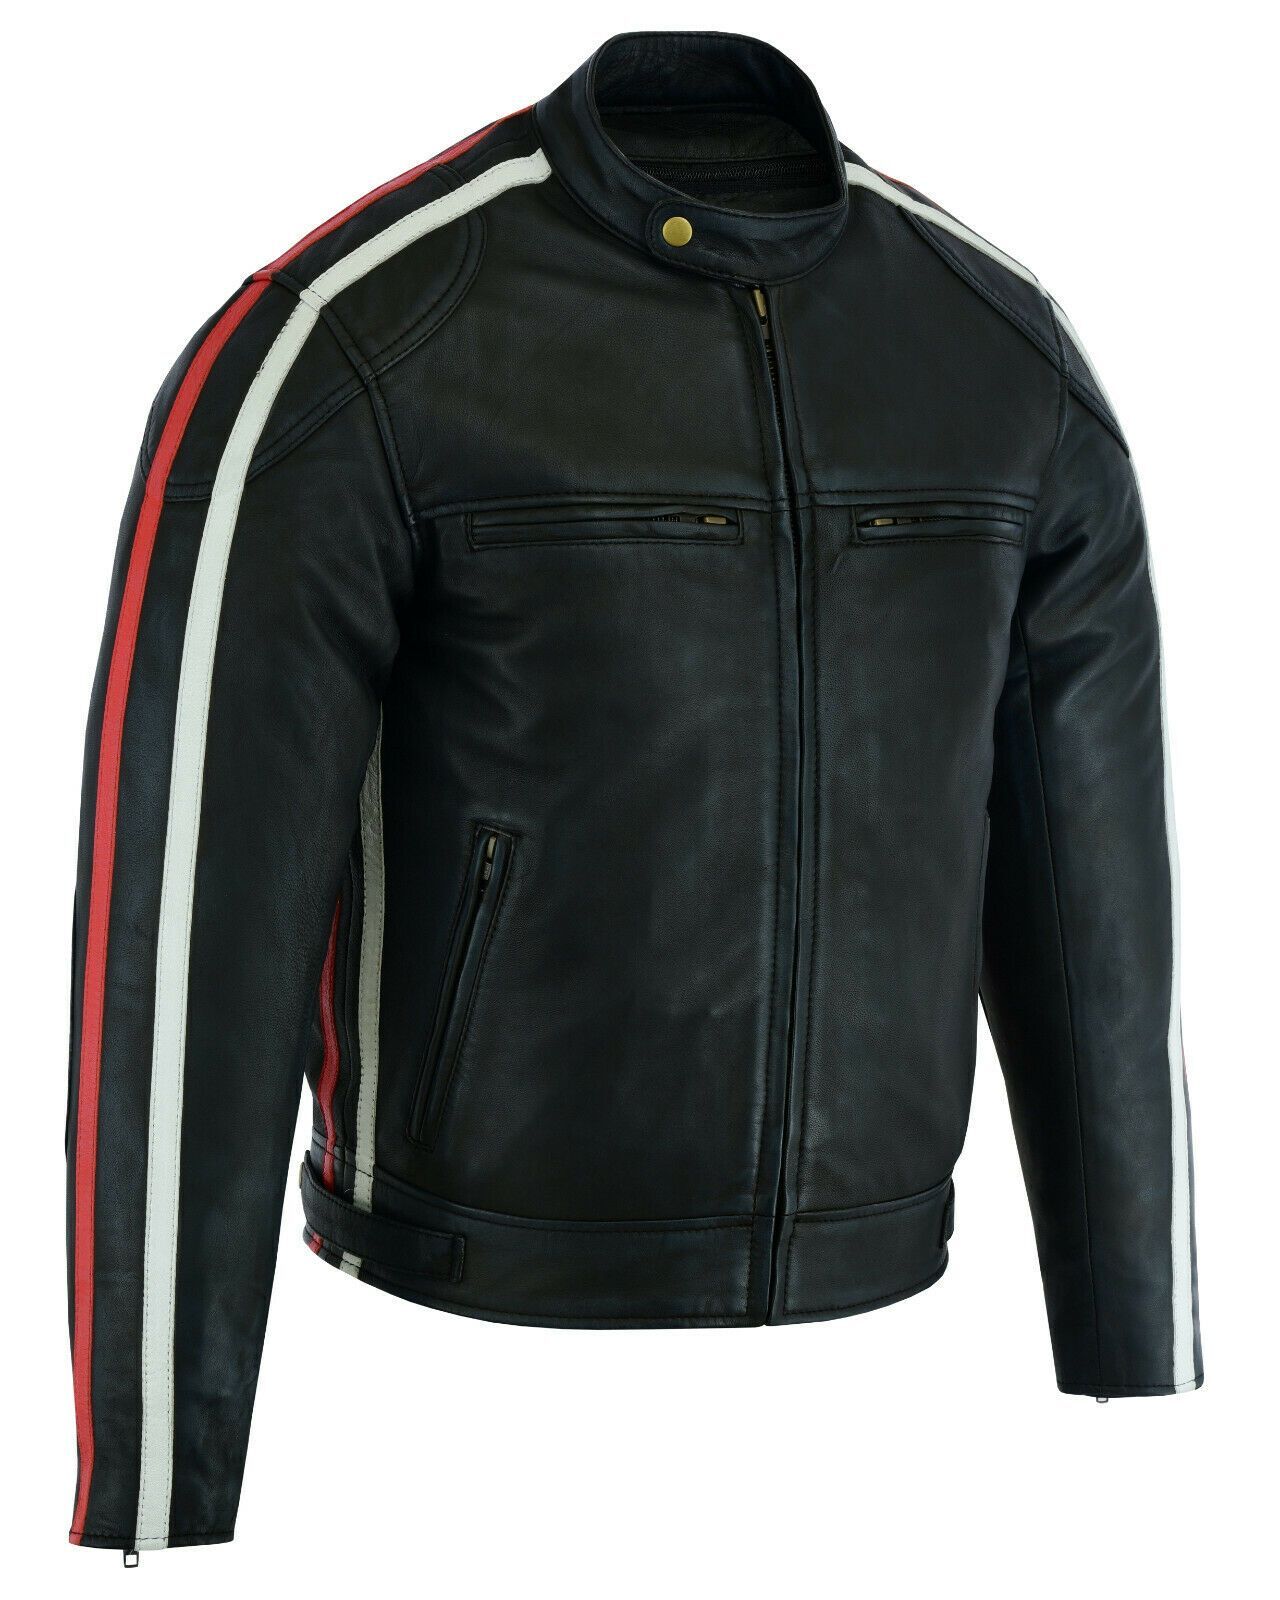 Classic Mens British Motorcycle Black Wax Leather Jacket Biker Red White Striped